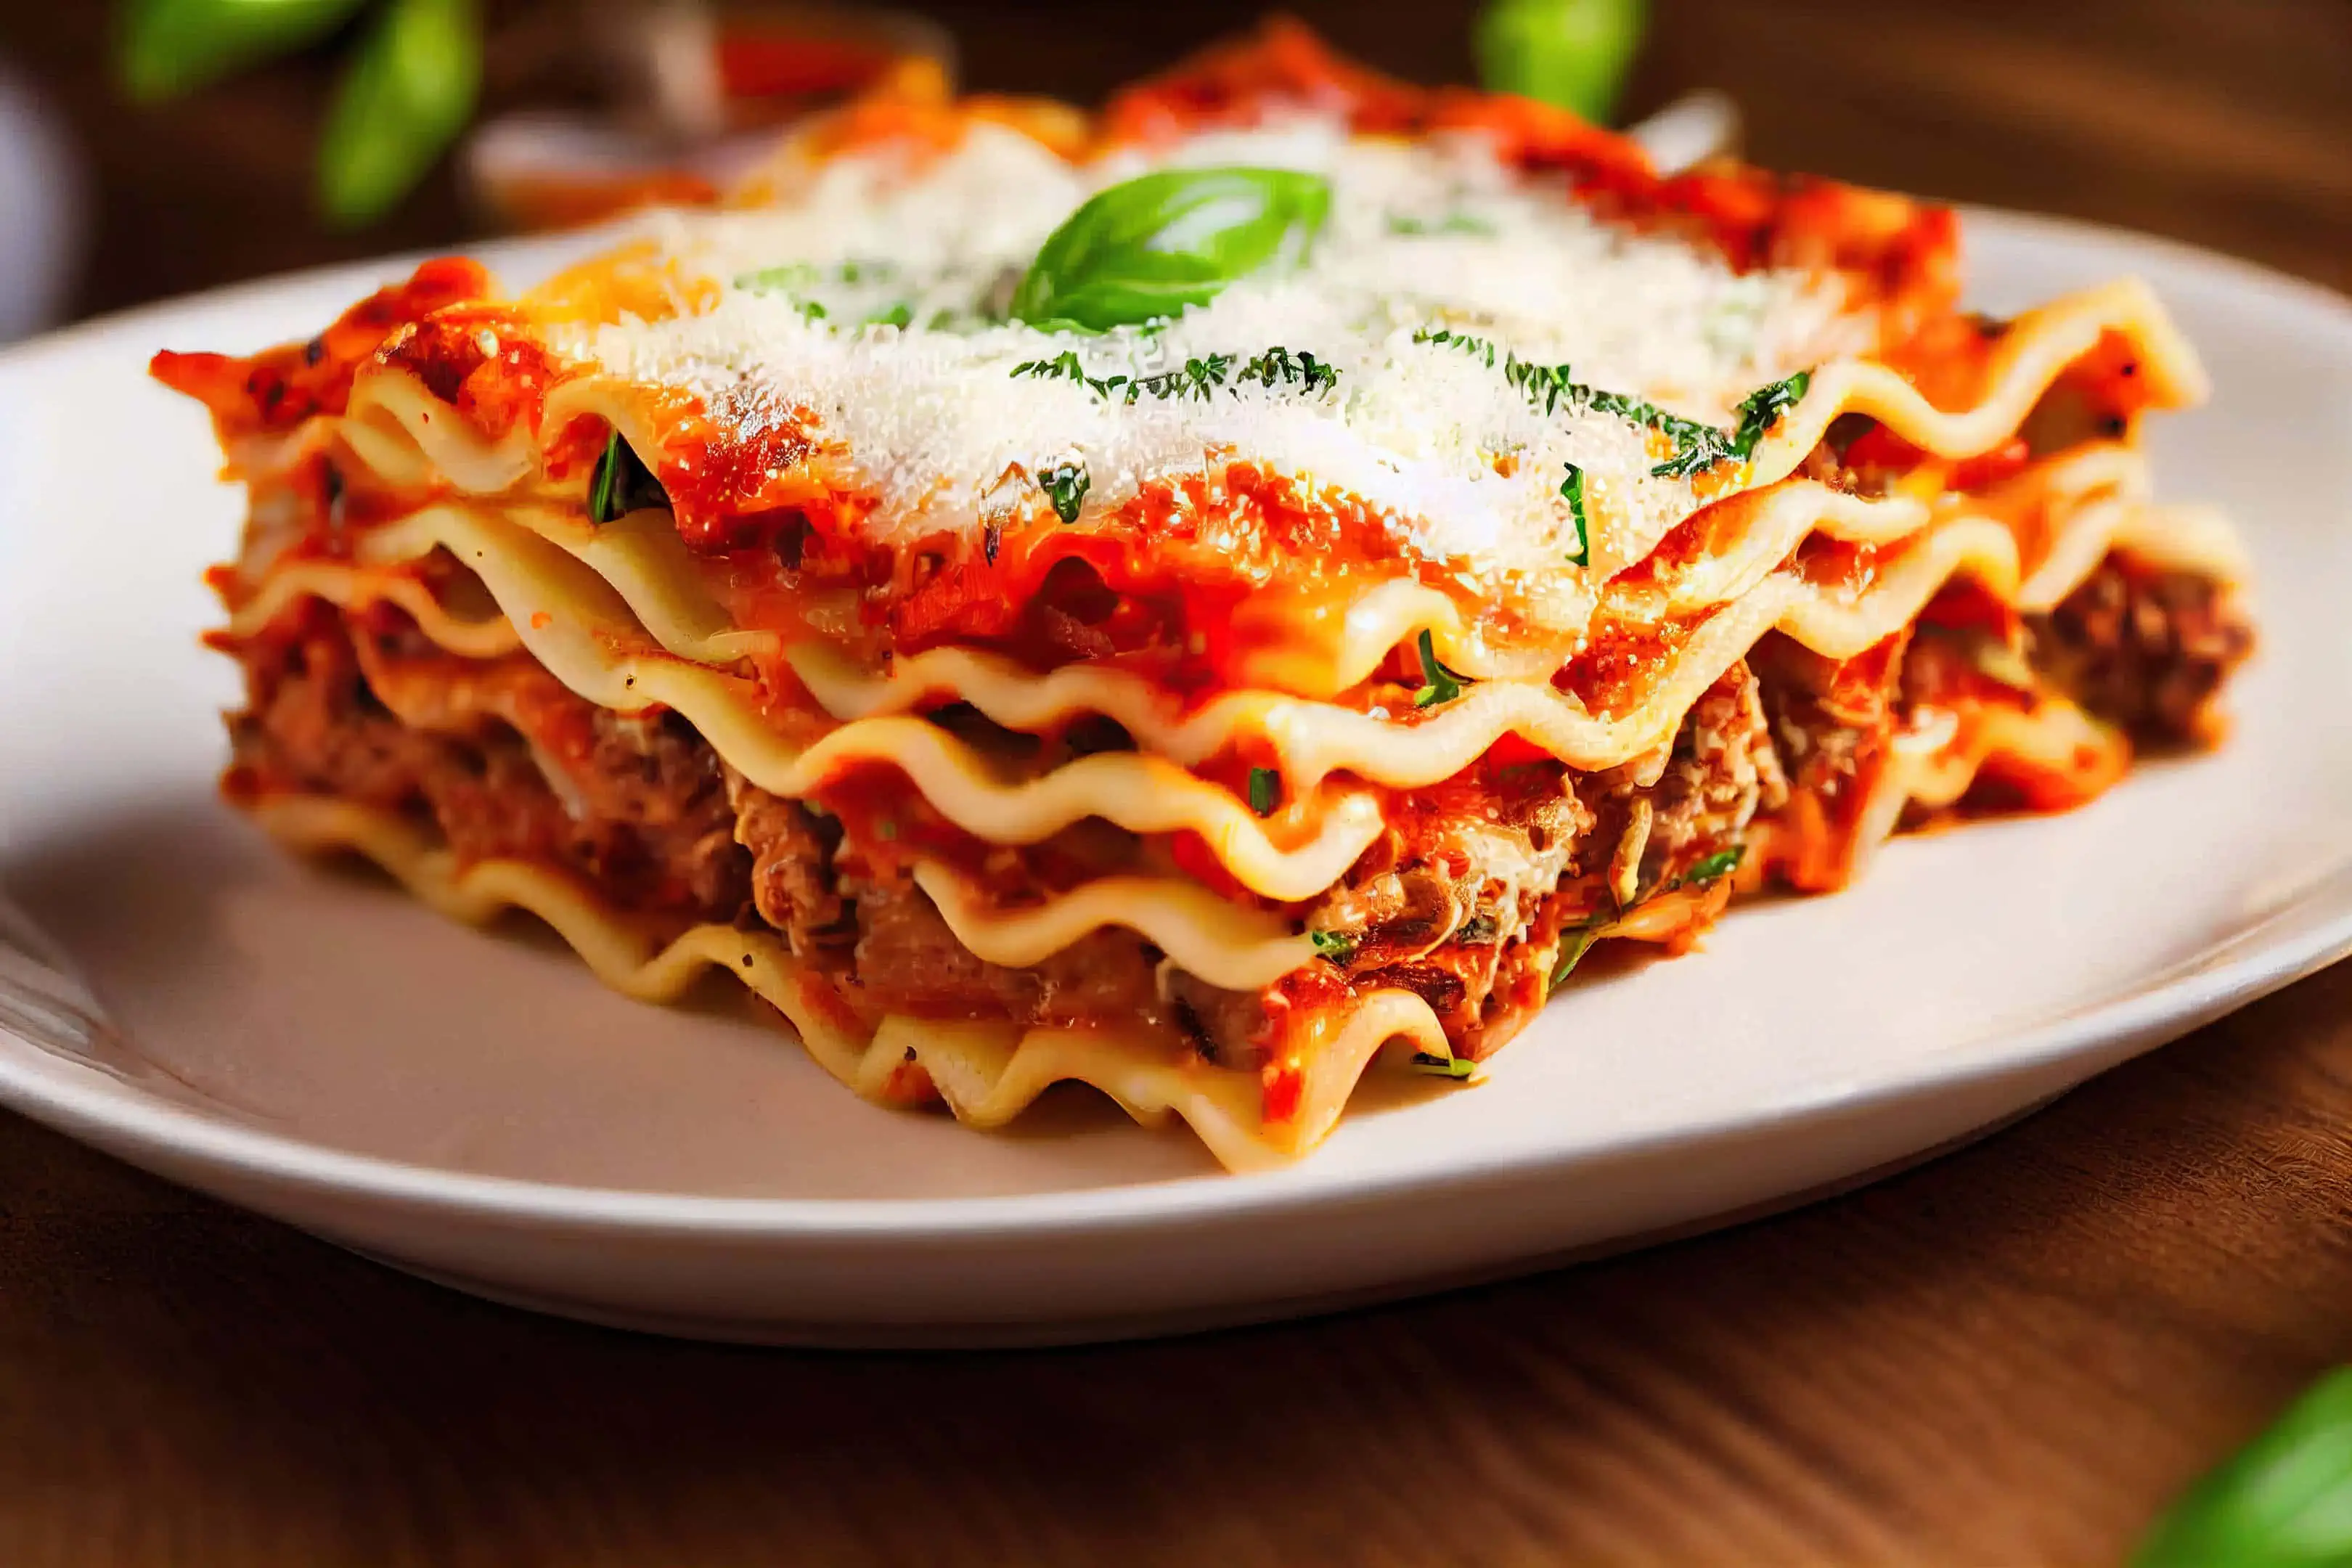 Muellers lasagna recipe with basil and grated parmesan cheese